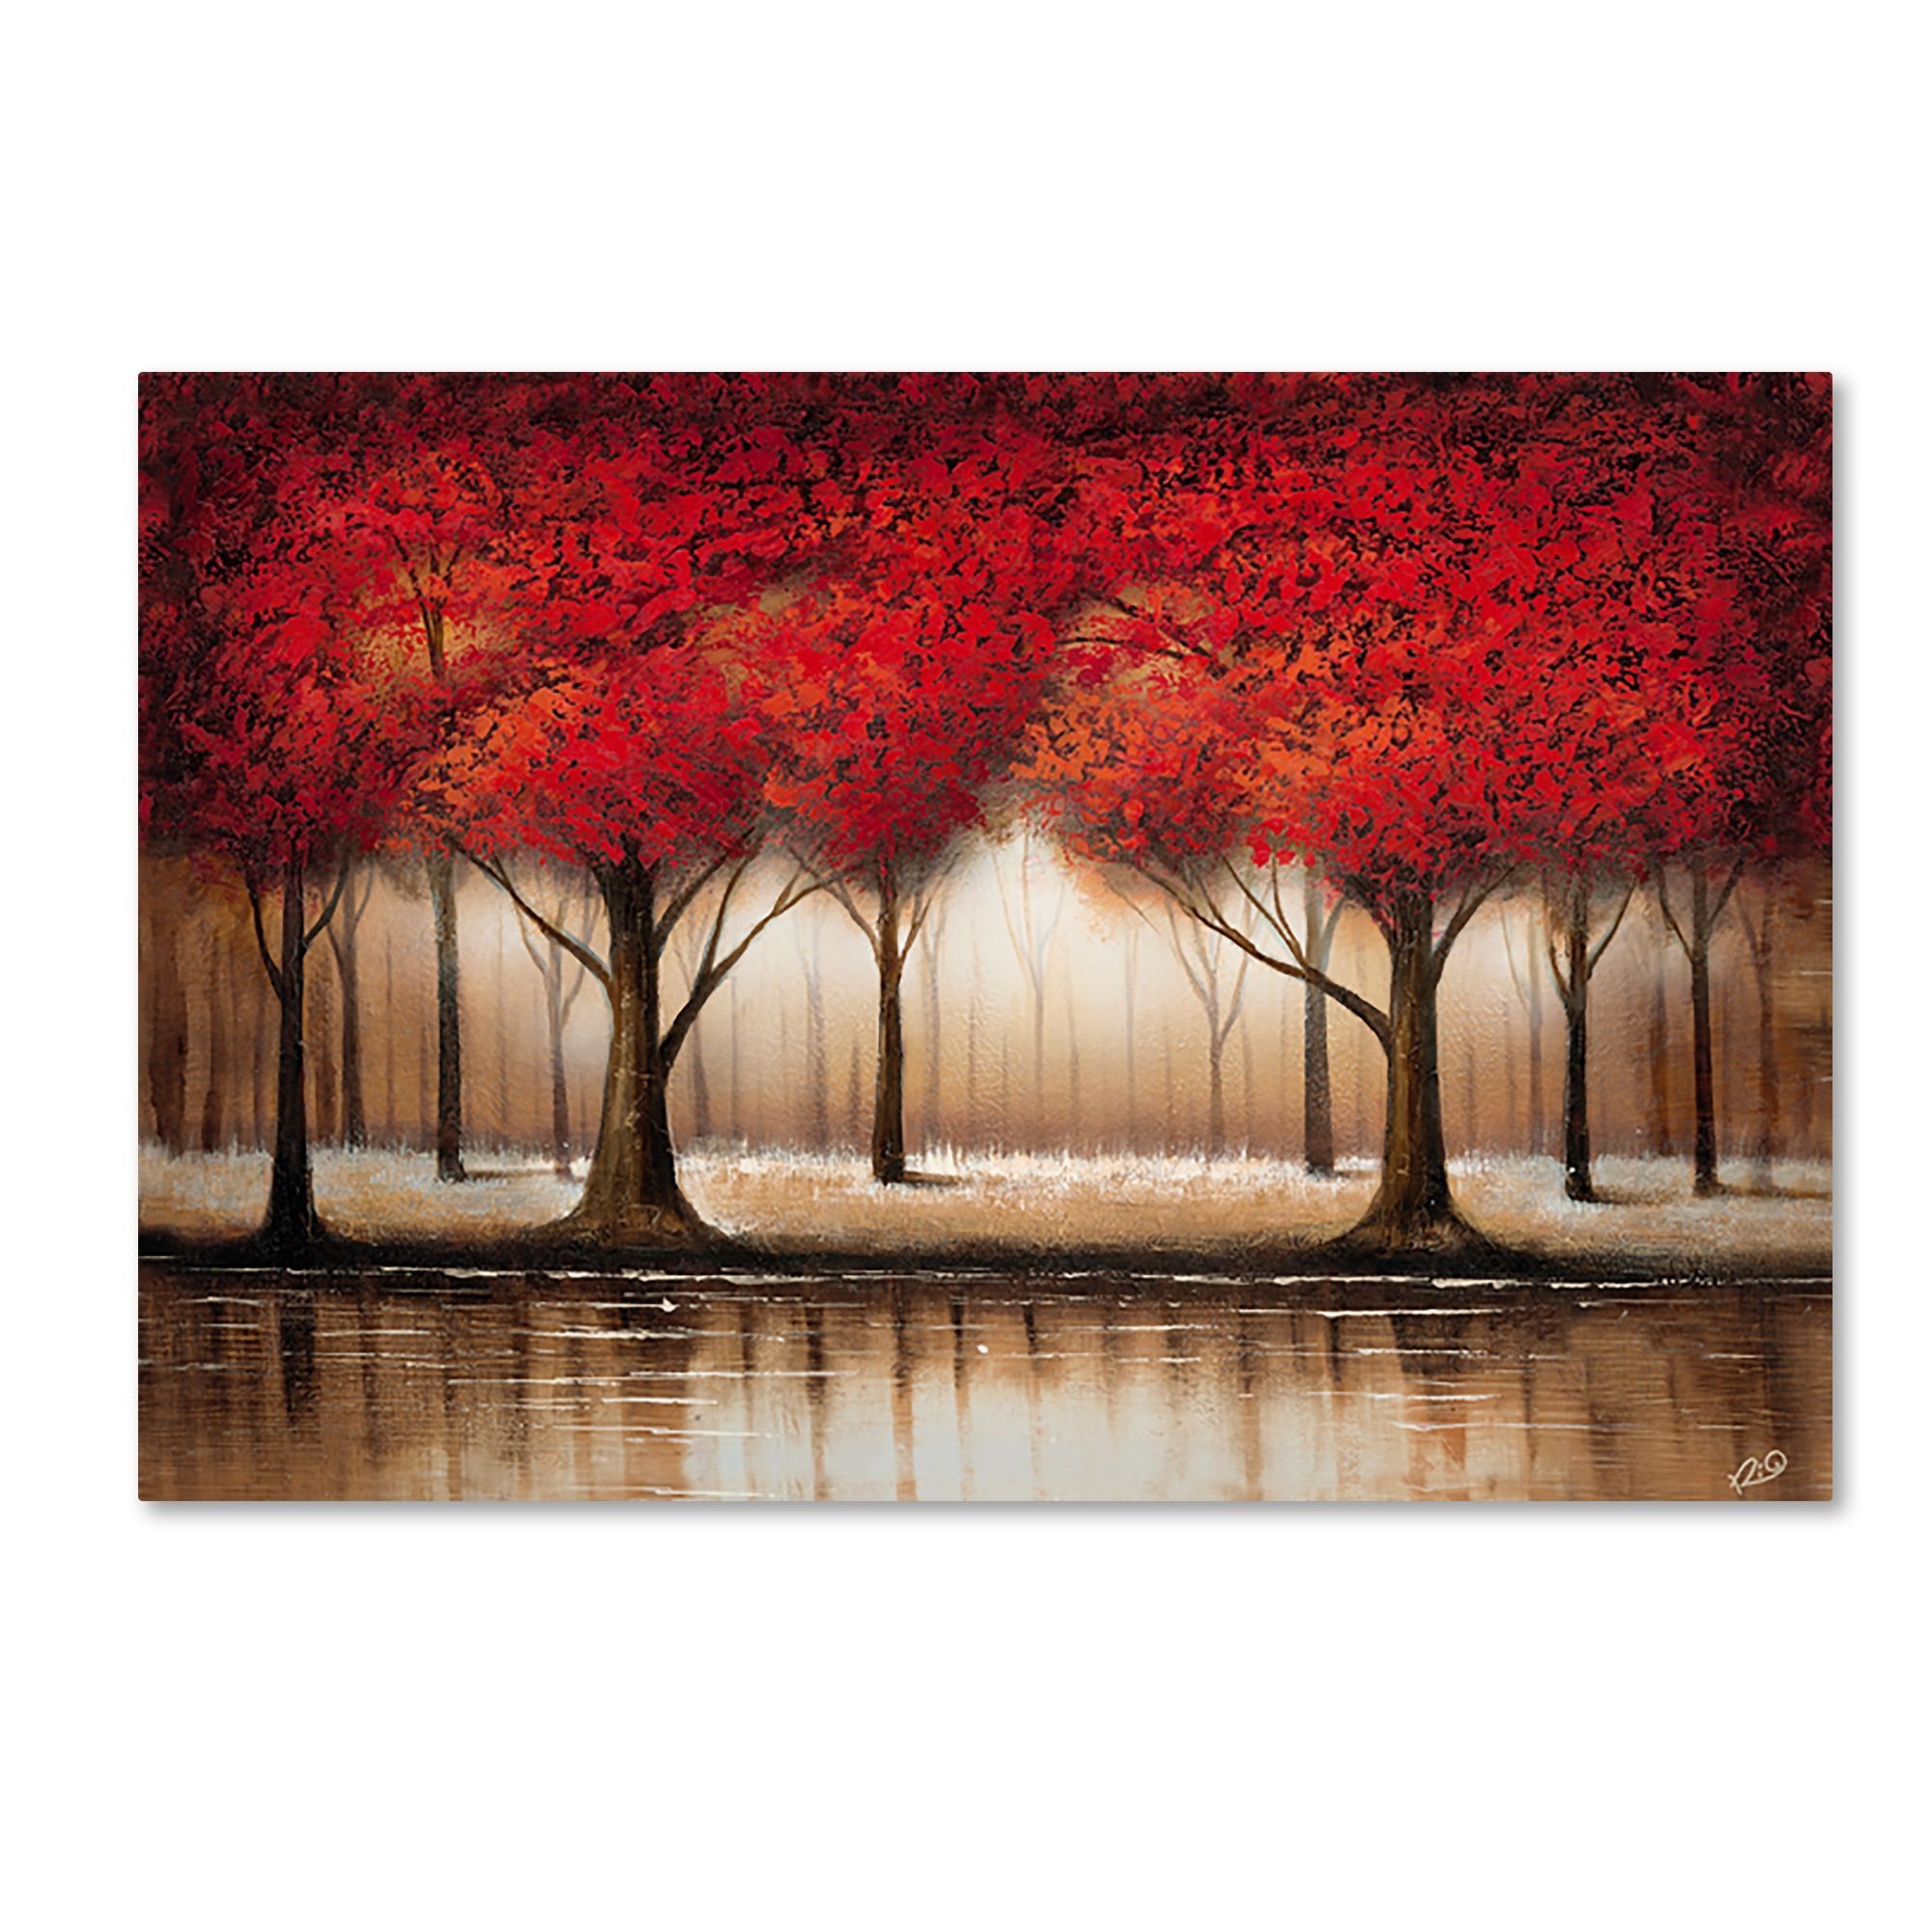 Rio parade of red trees canvas art